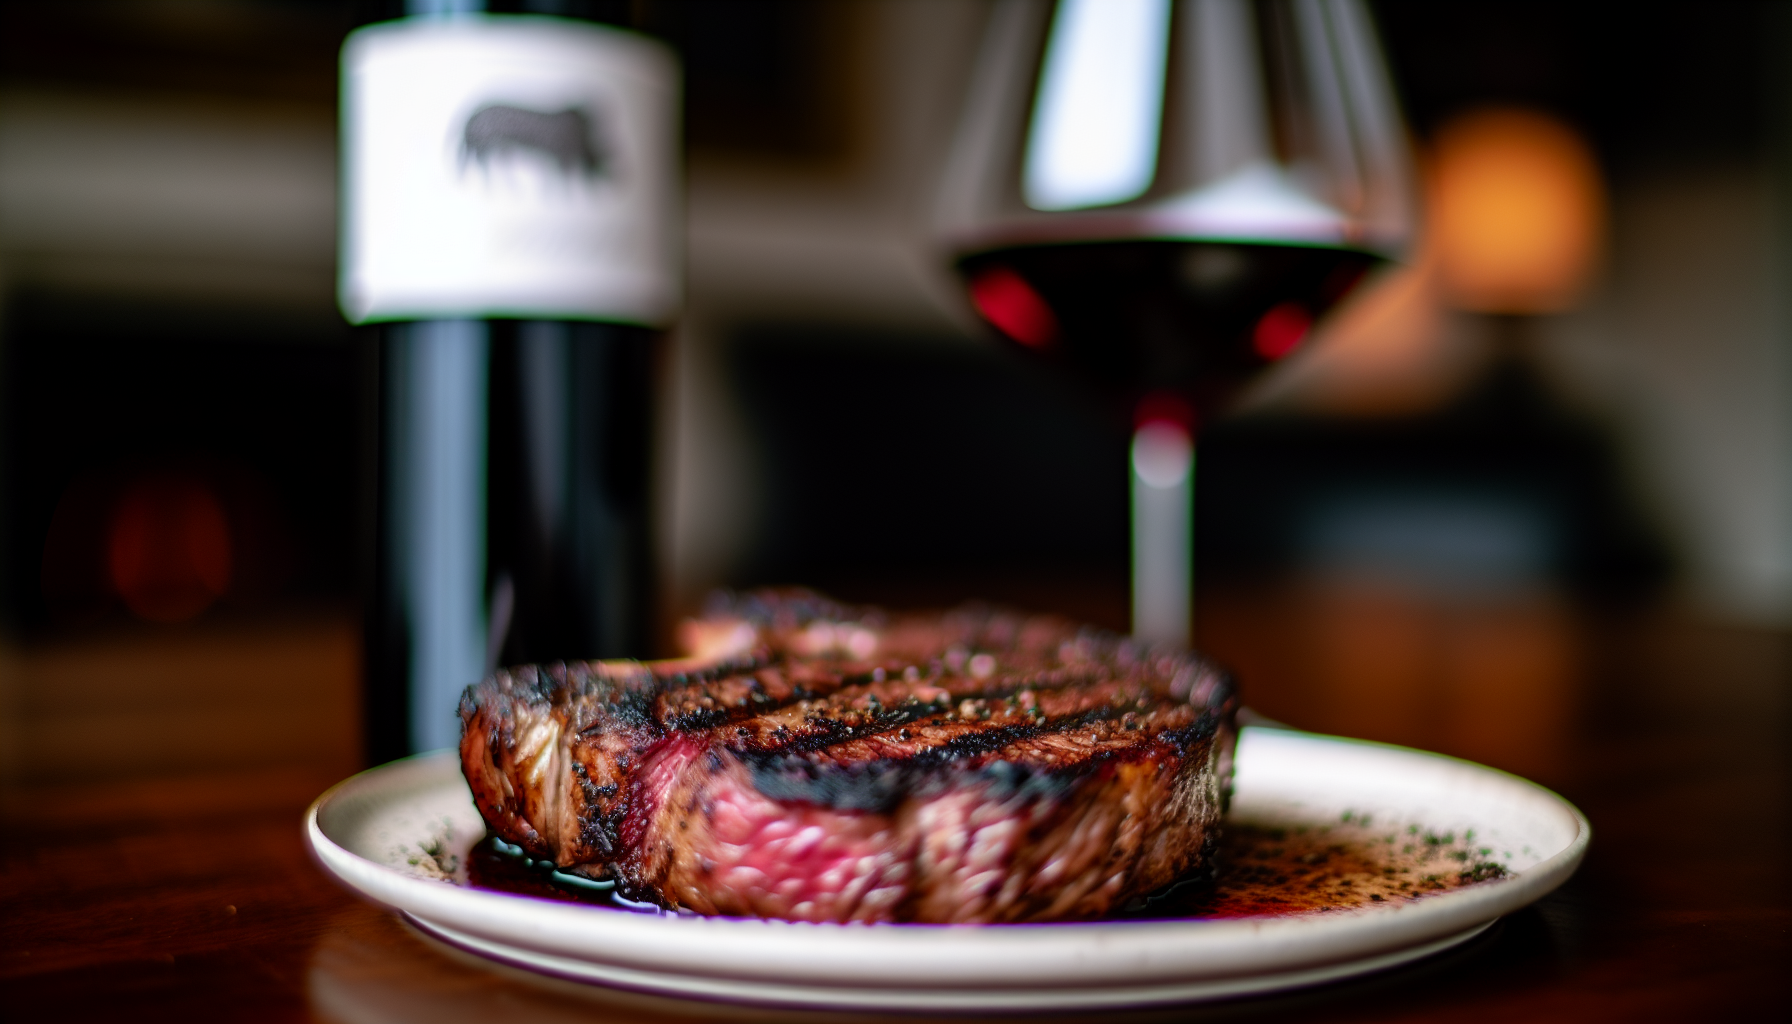 Grilled steak with a glass of Cabernet Sauvignon